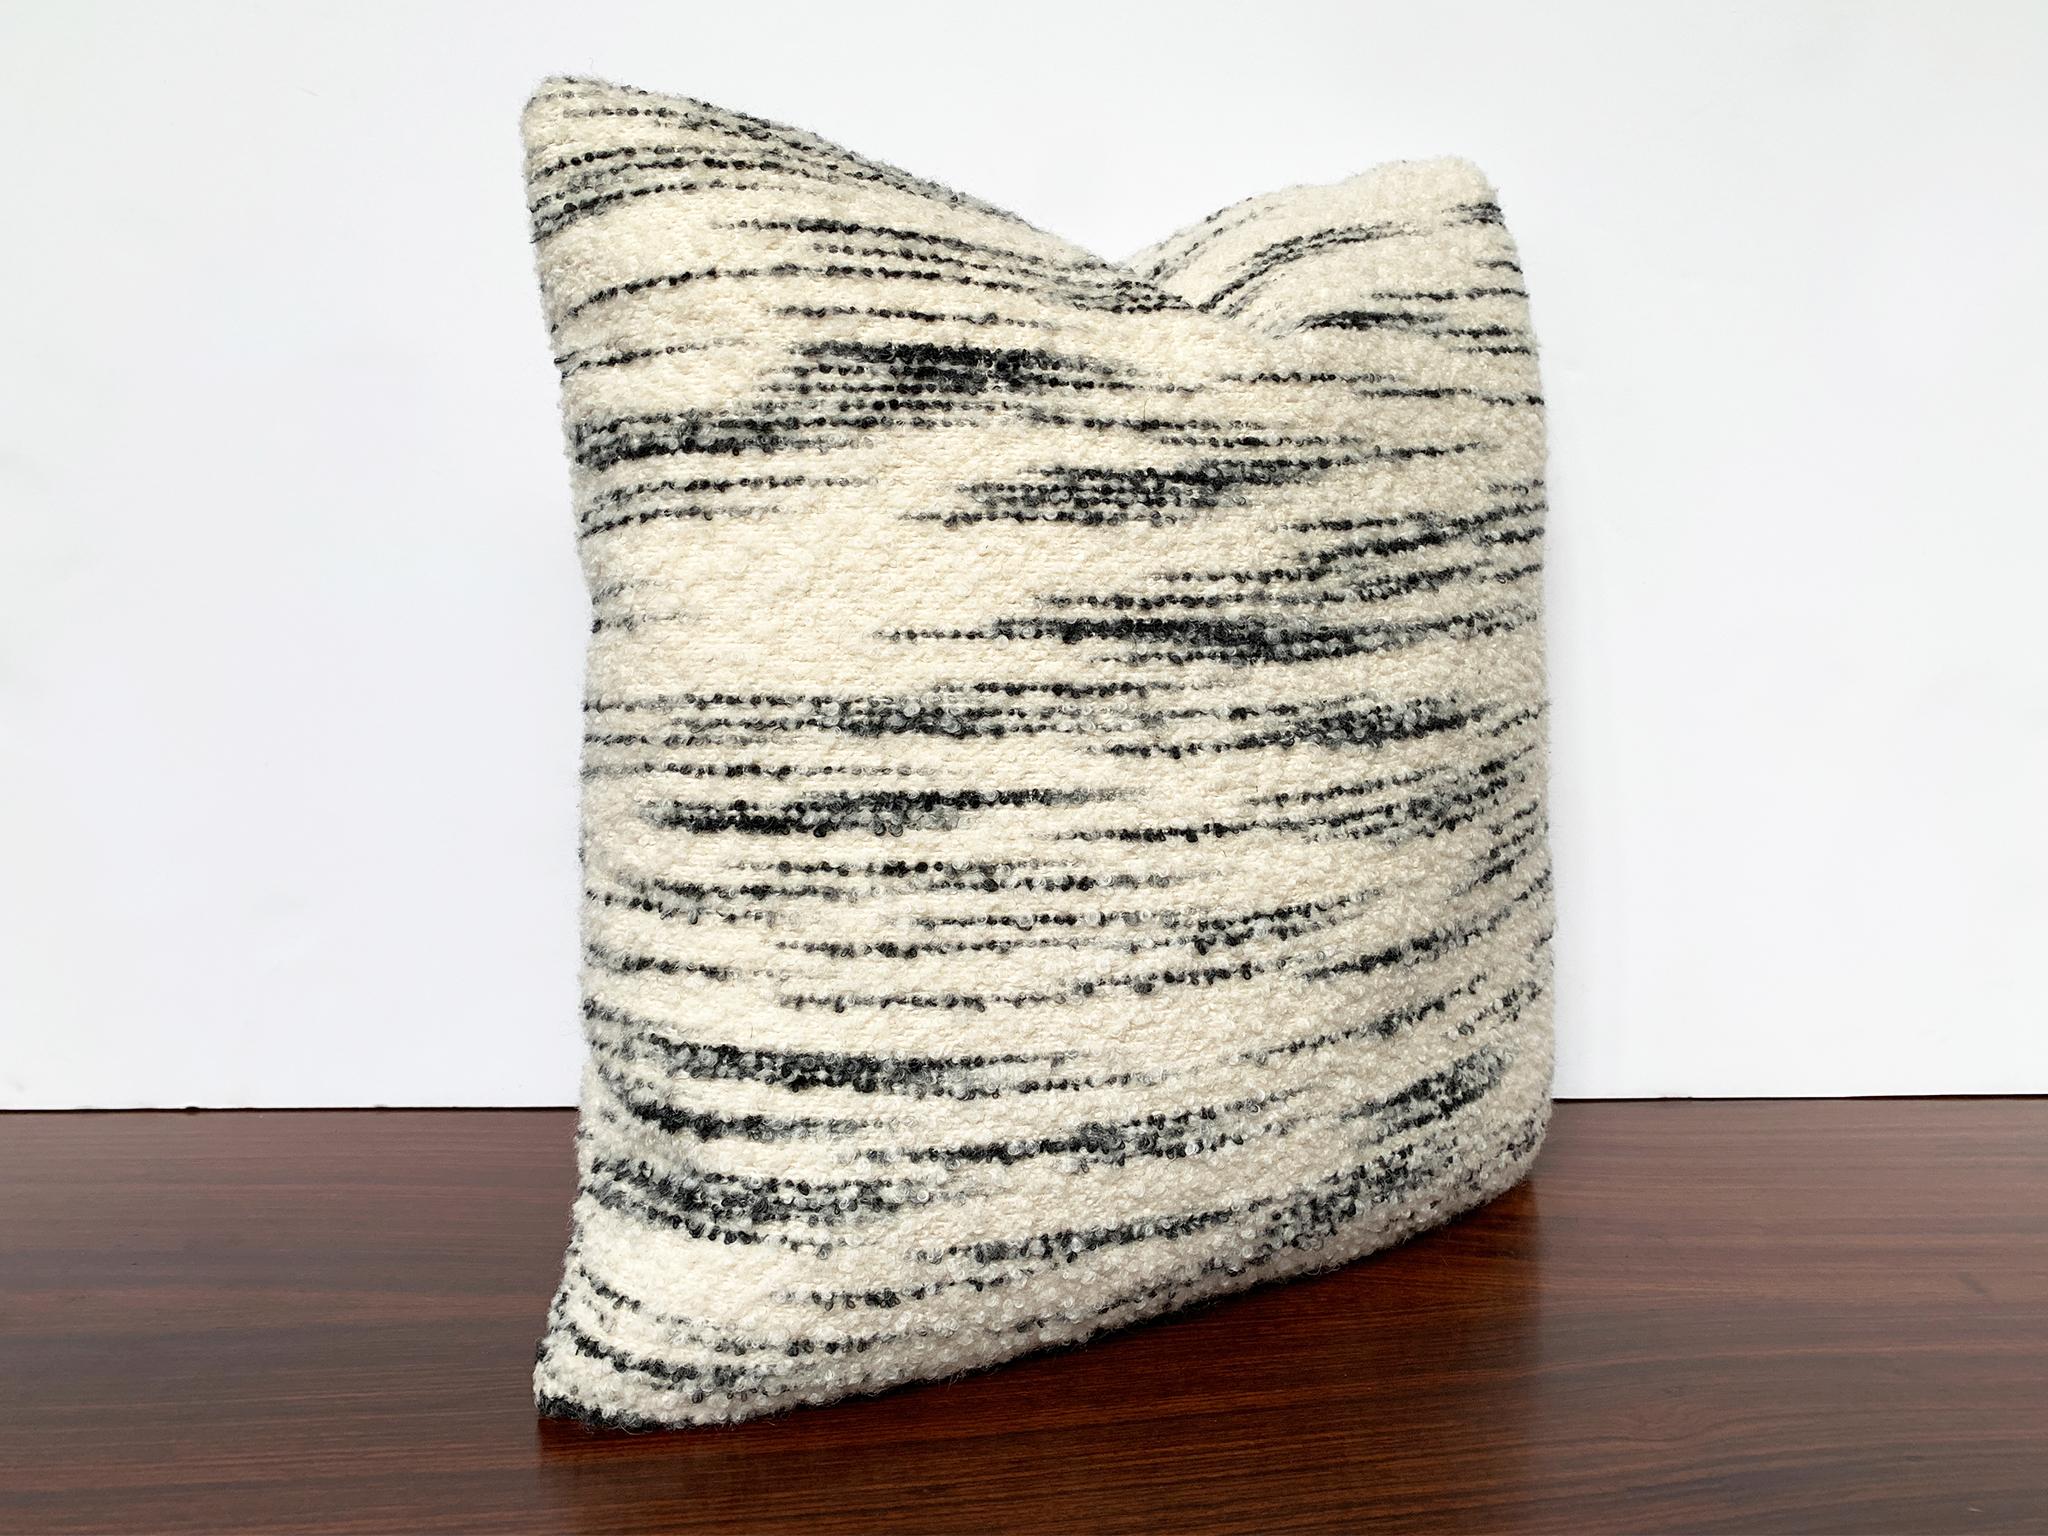 This new, custom made pillow is crafted from a soft wool bouclé made by Schumacher. The fabric is cream-white with horizontal black stripes and has a curly texture. The filling is a combination of foam and down. This is a very cozy pillow for your